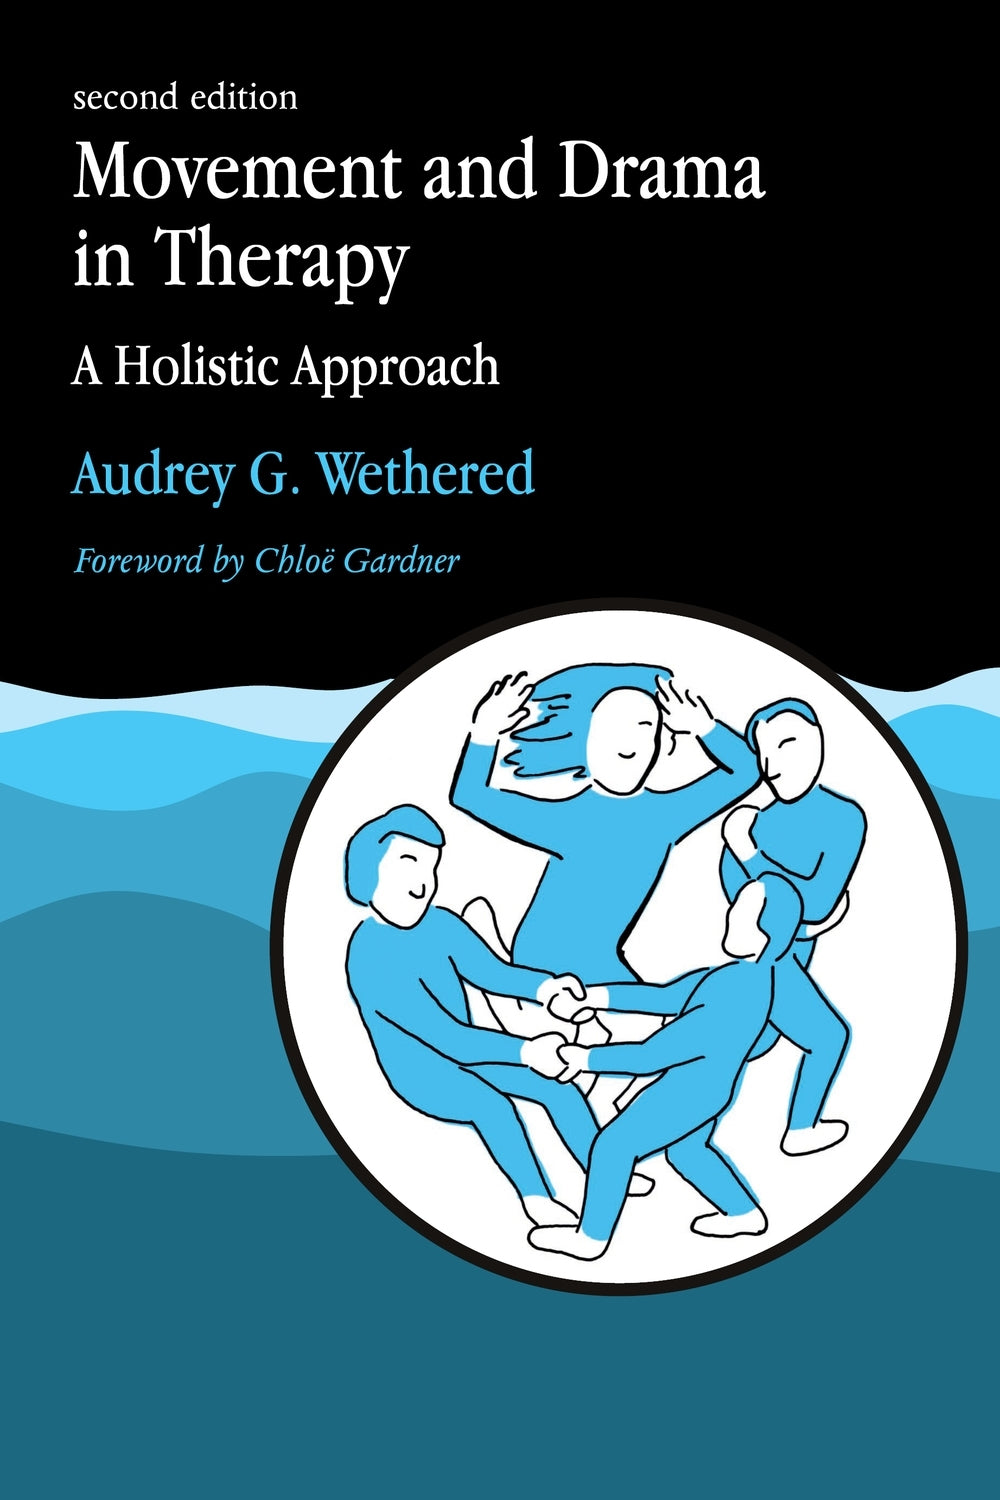 Movement and Drama in Therapy by Audrey Wethered